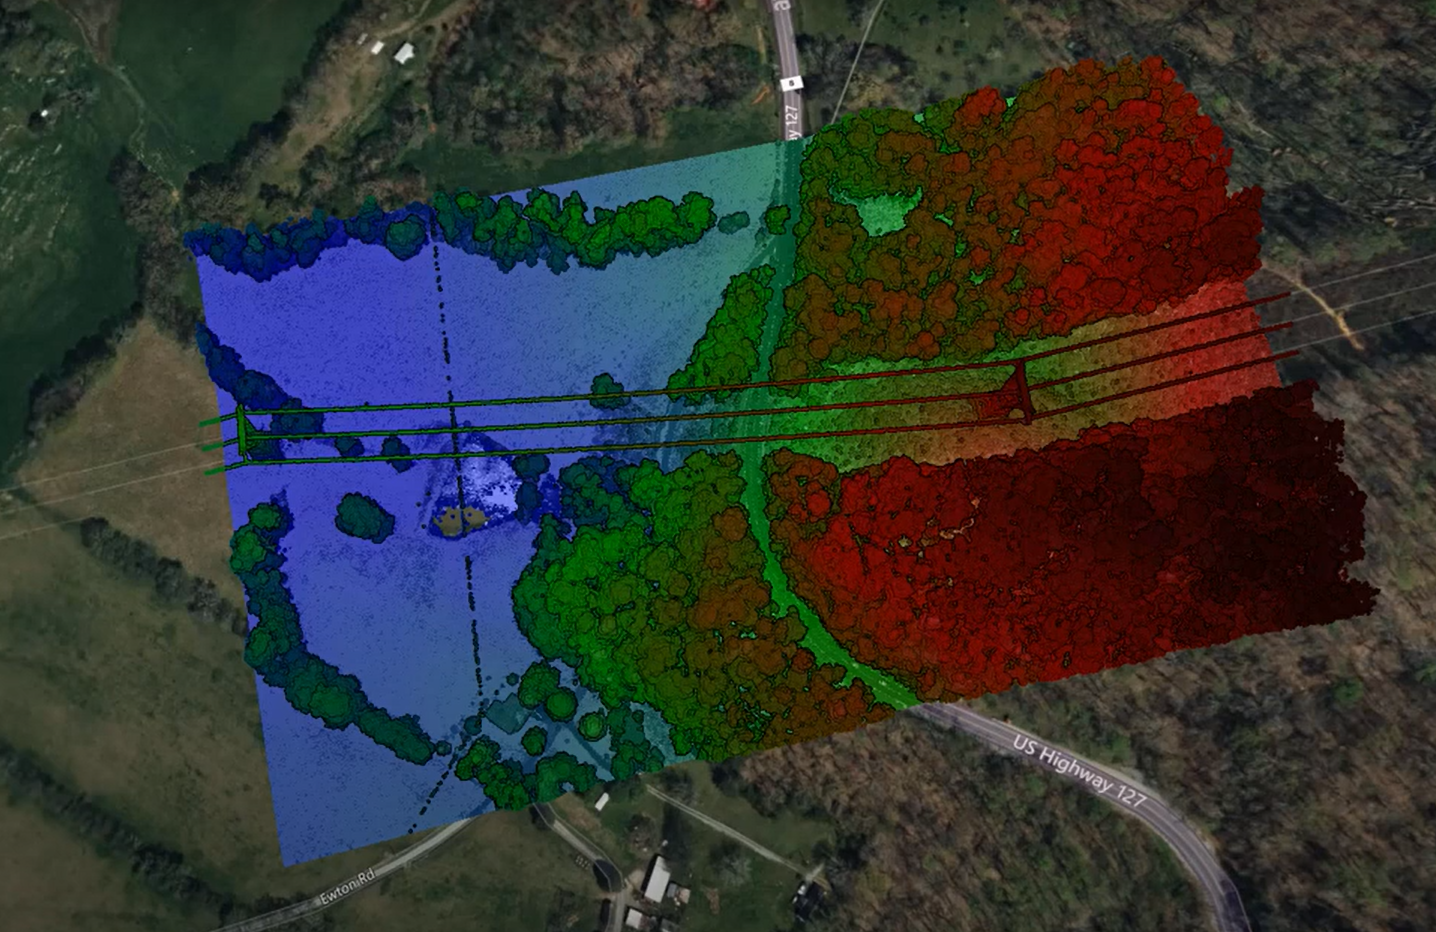 Point Cloud in Equator